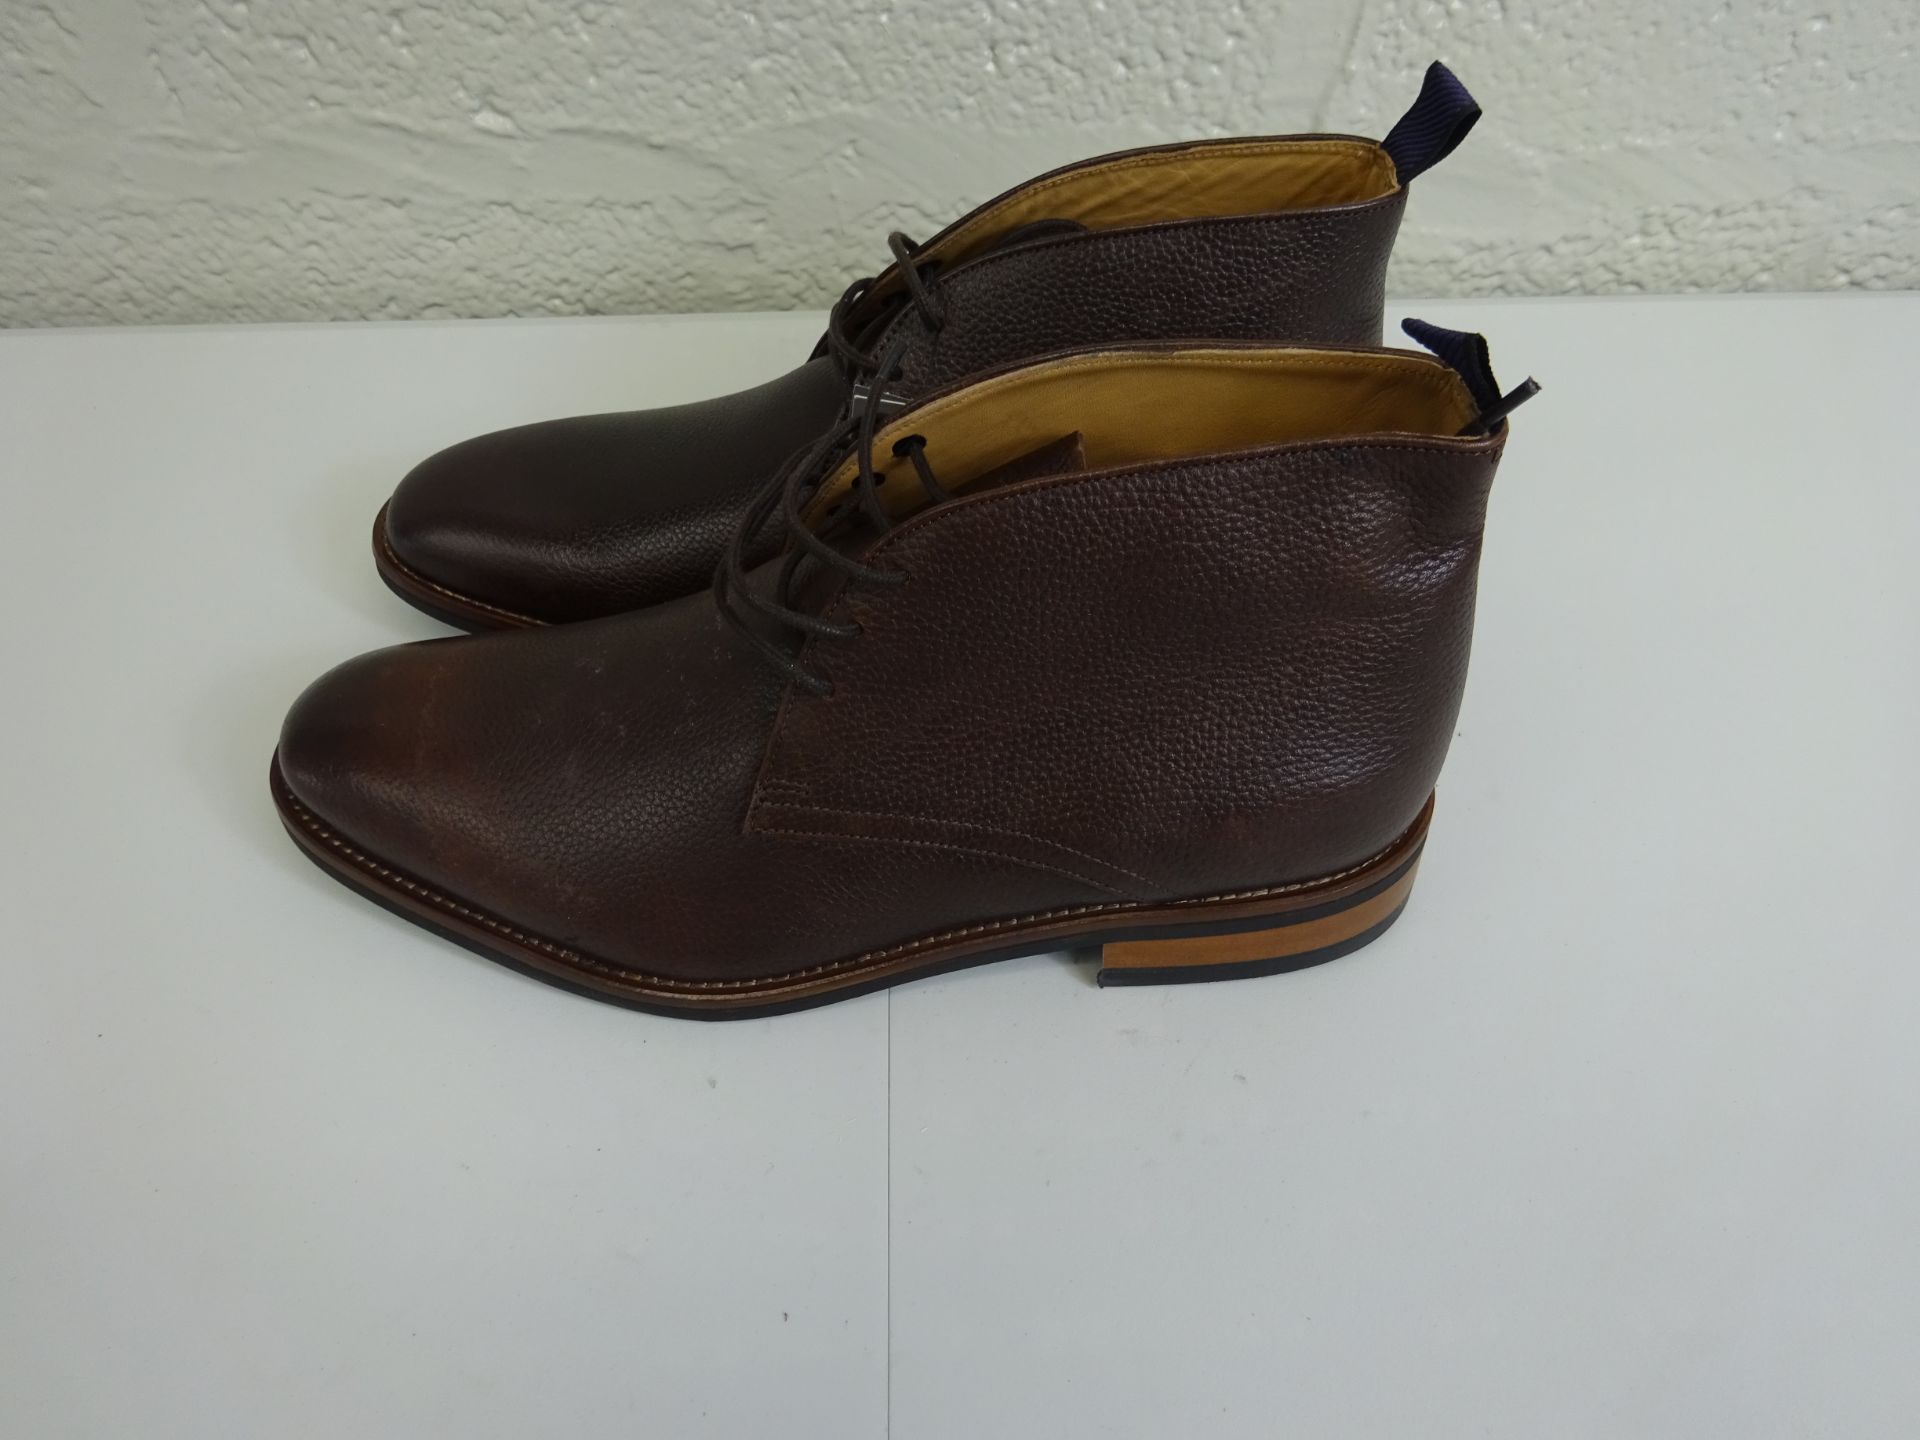 M & S Size 9 Mens brown leather shoes - RRP £79.00